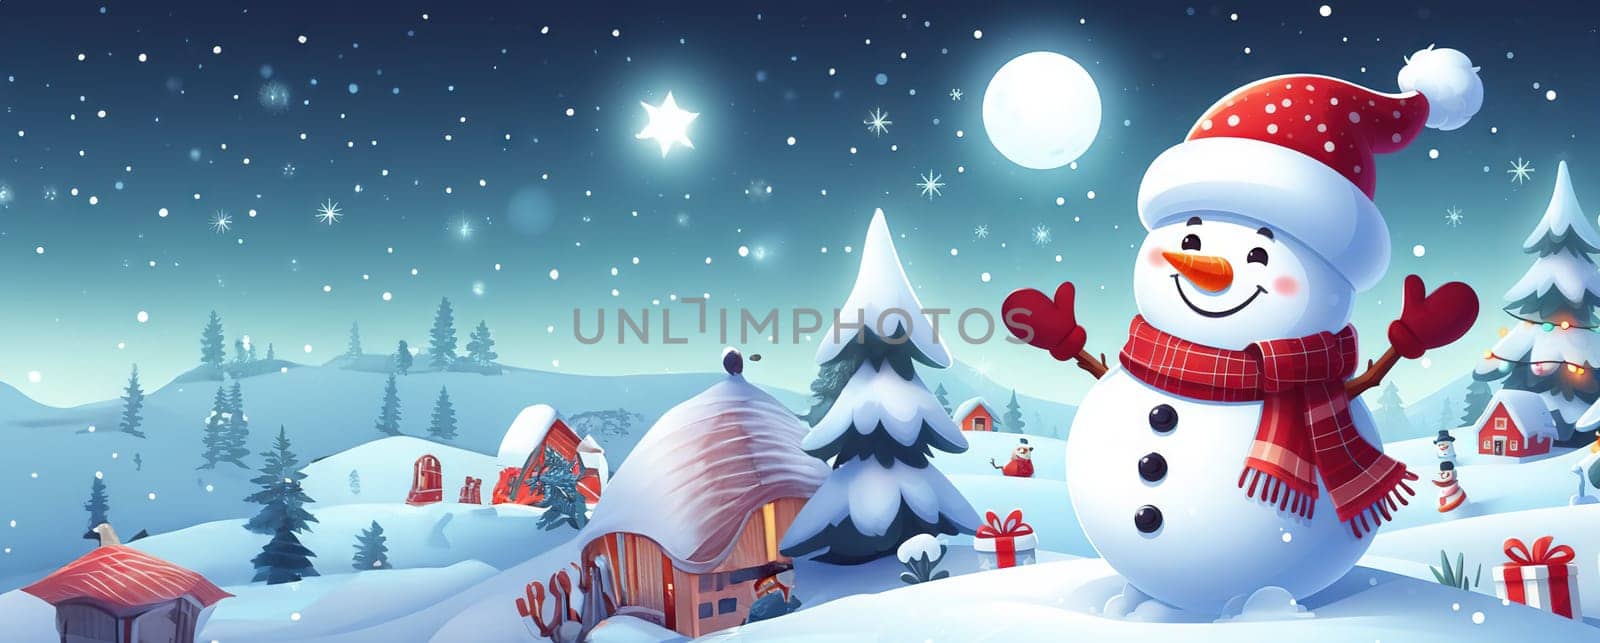 Cute snowman and snow forested landscape. Winter decoration and background.